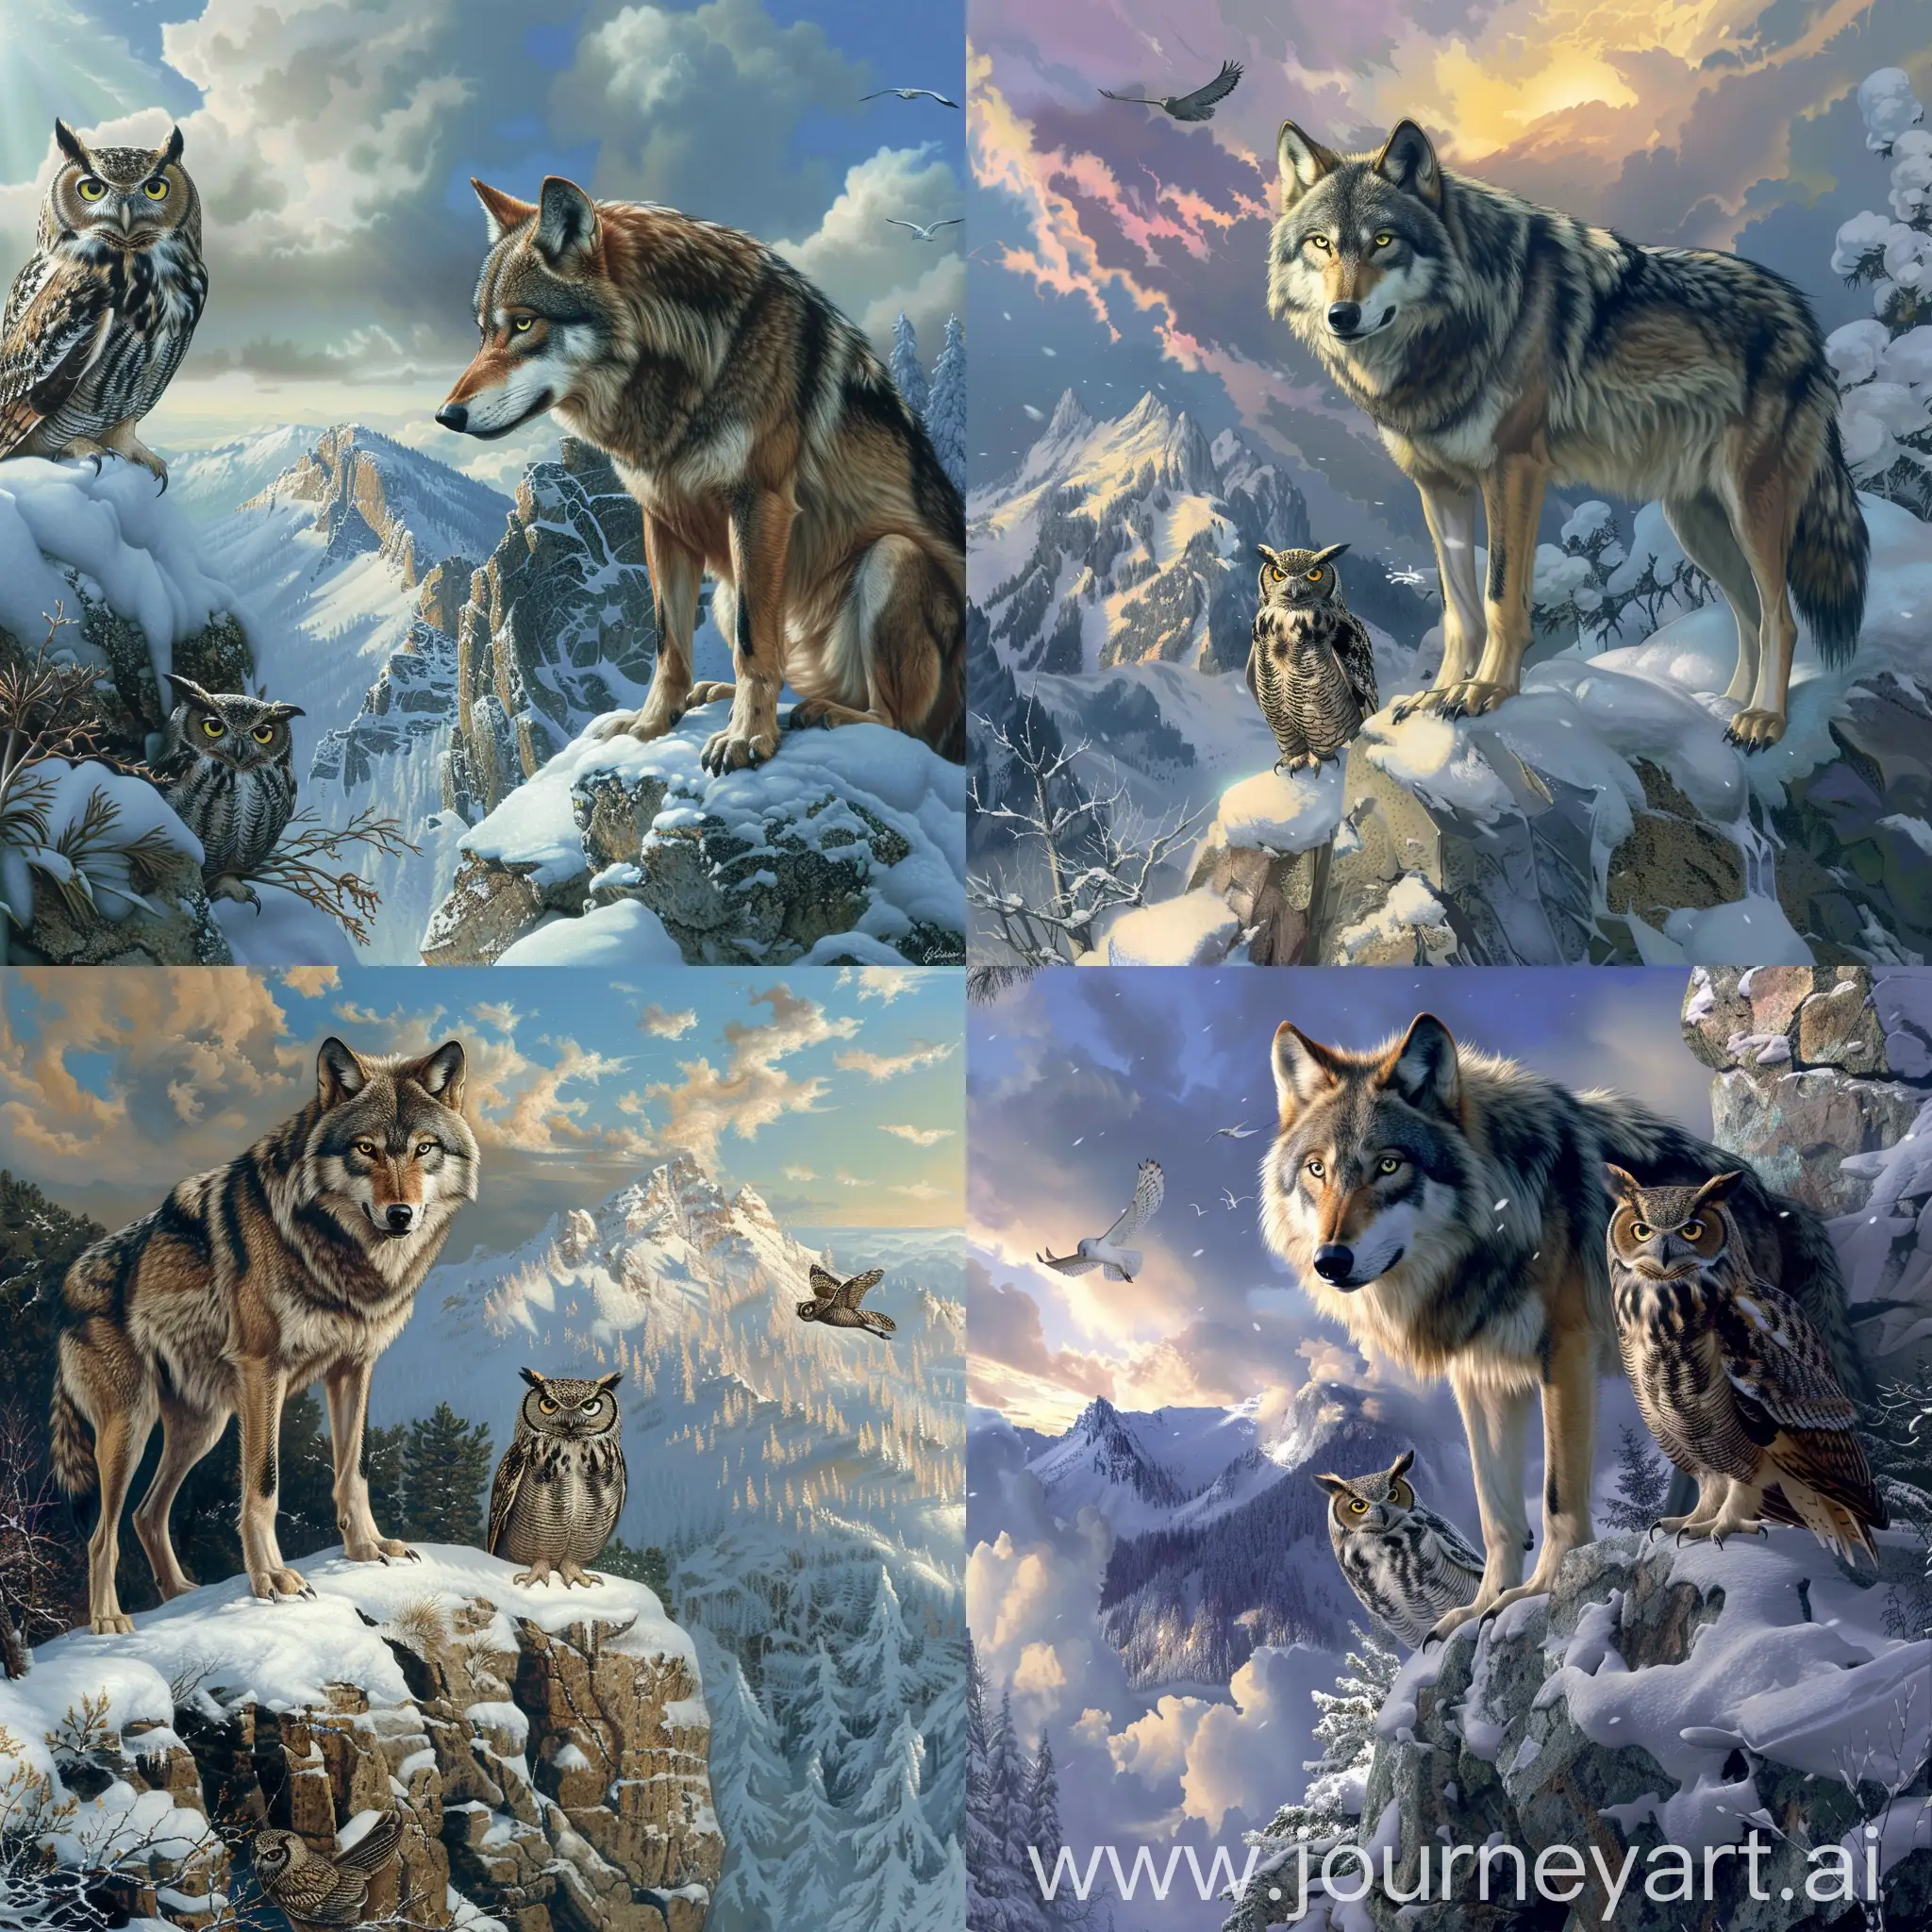 Majestic-Wolf-and-Owl-Encounter-in-Snowy-Mountain-Landscape